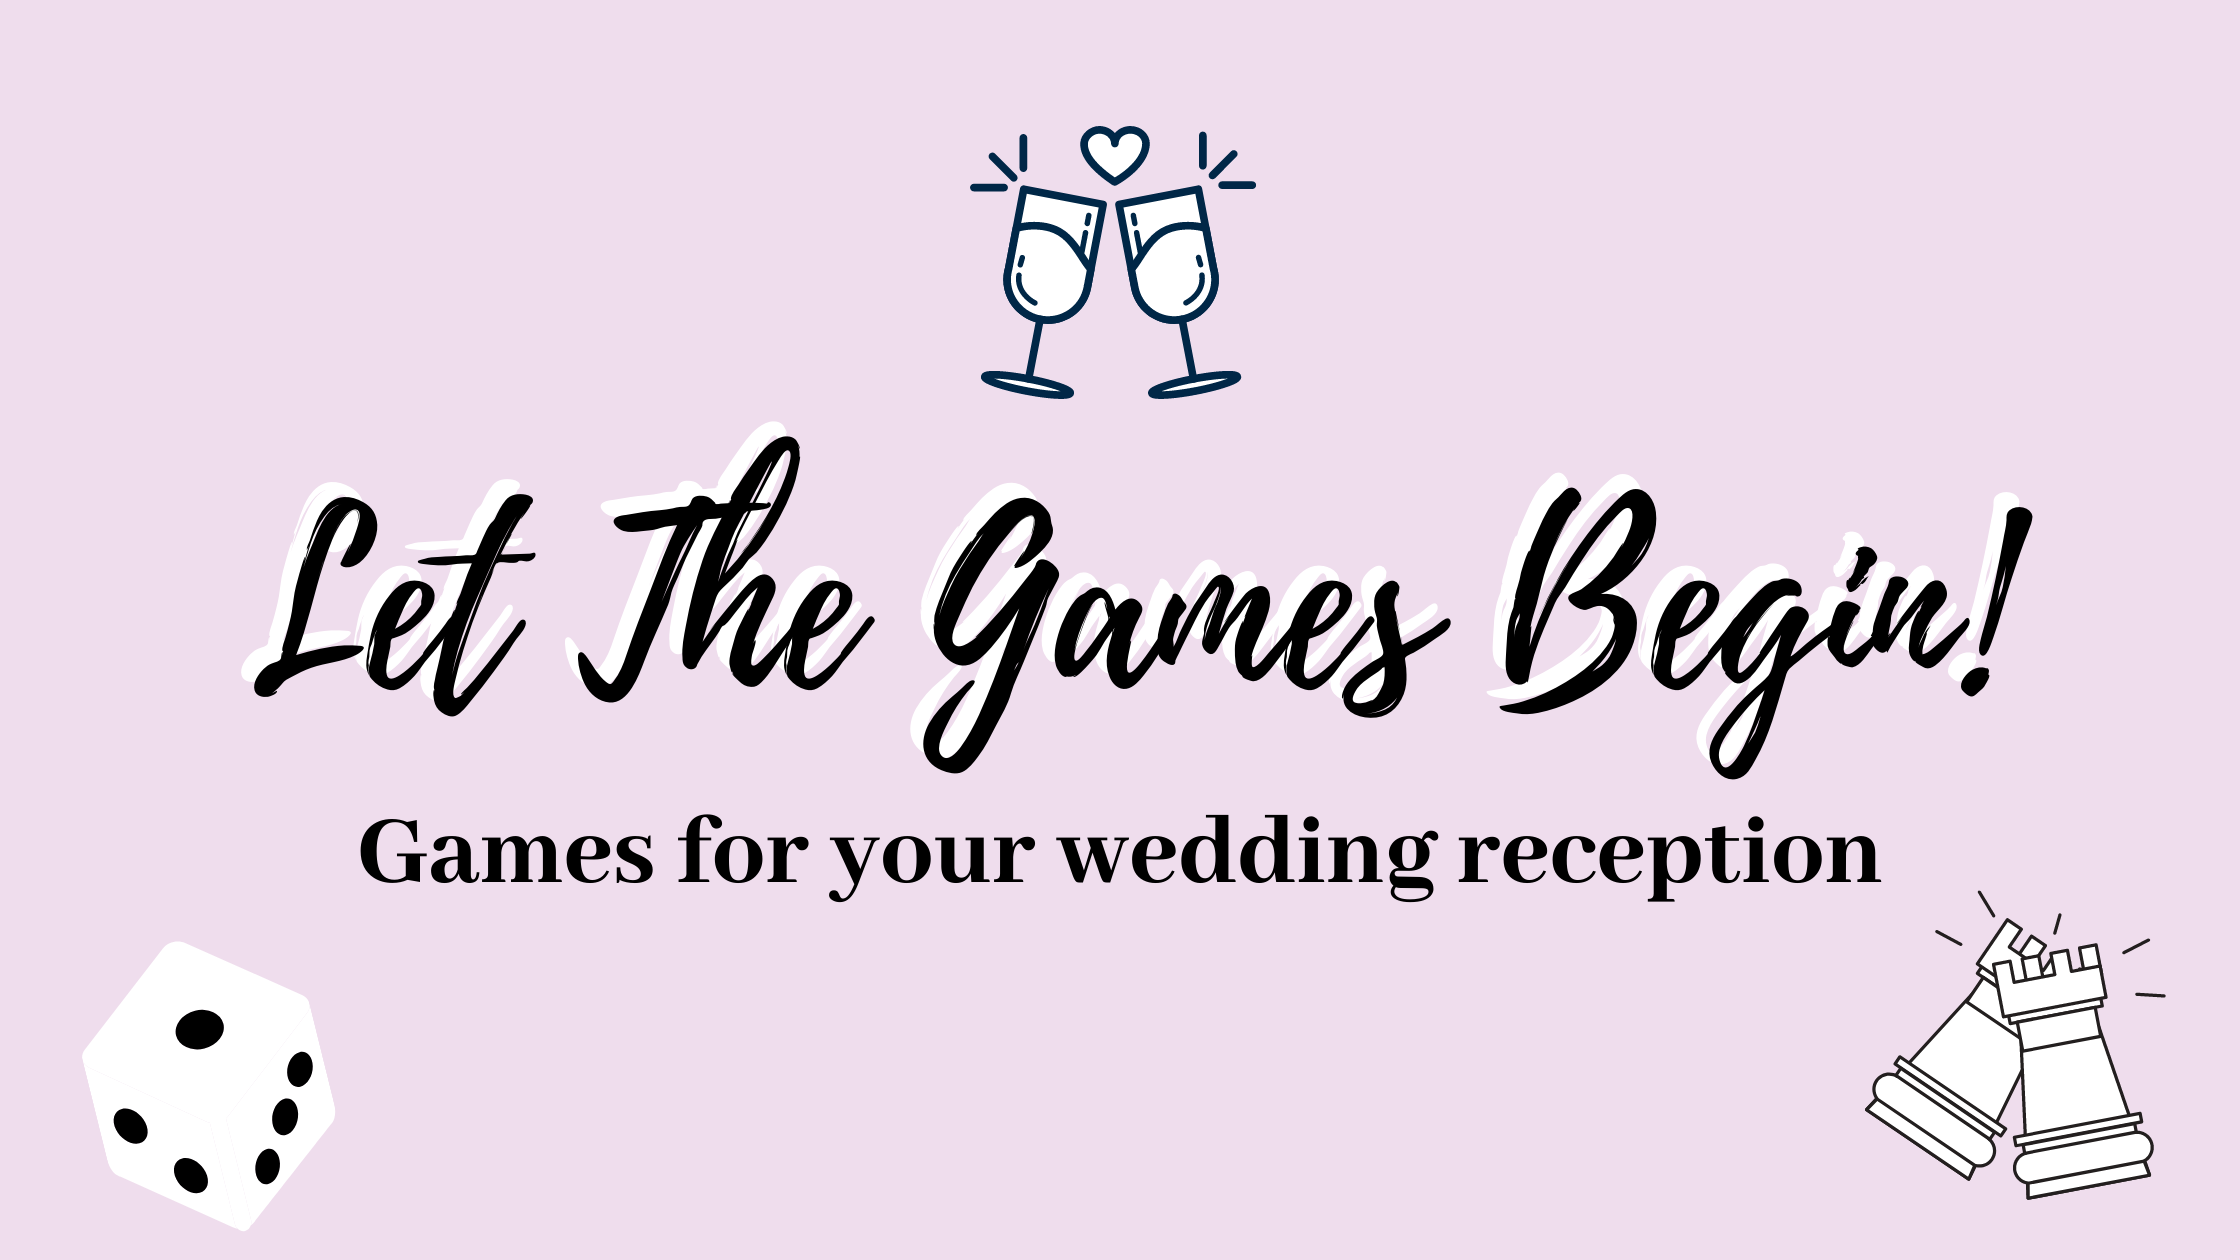 Let The Games Begin! Games for your Wedding Reception